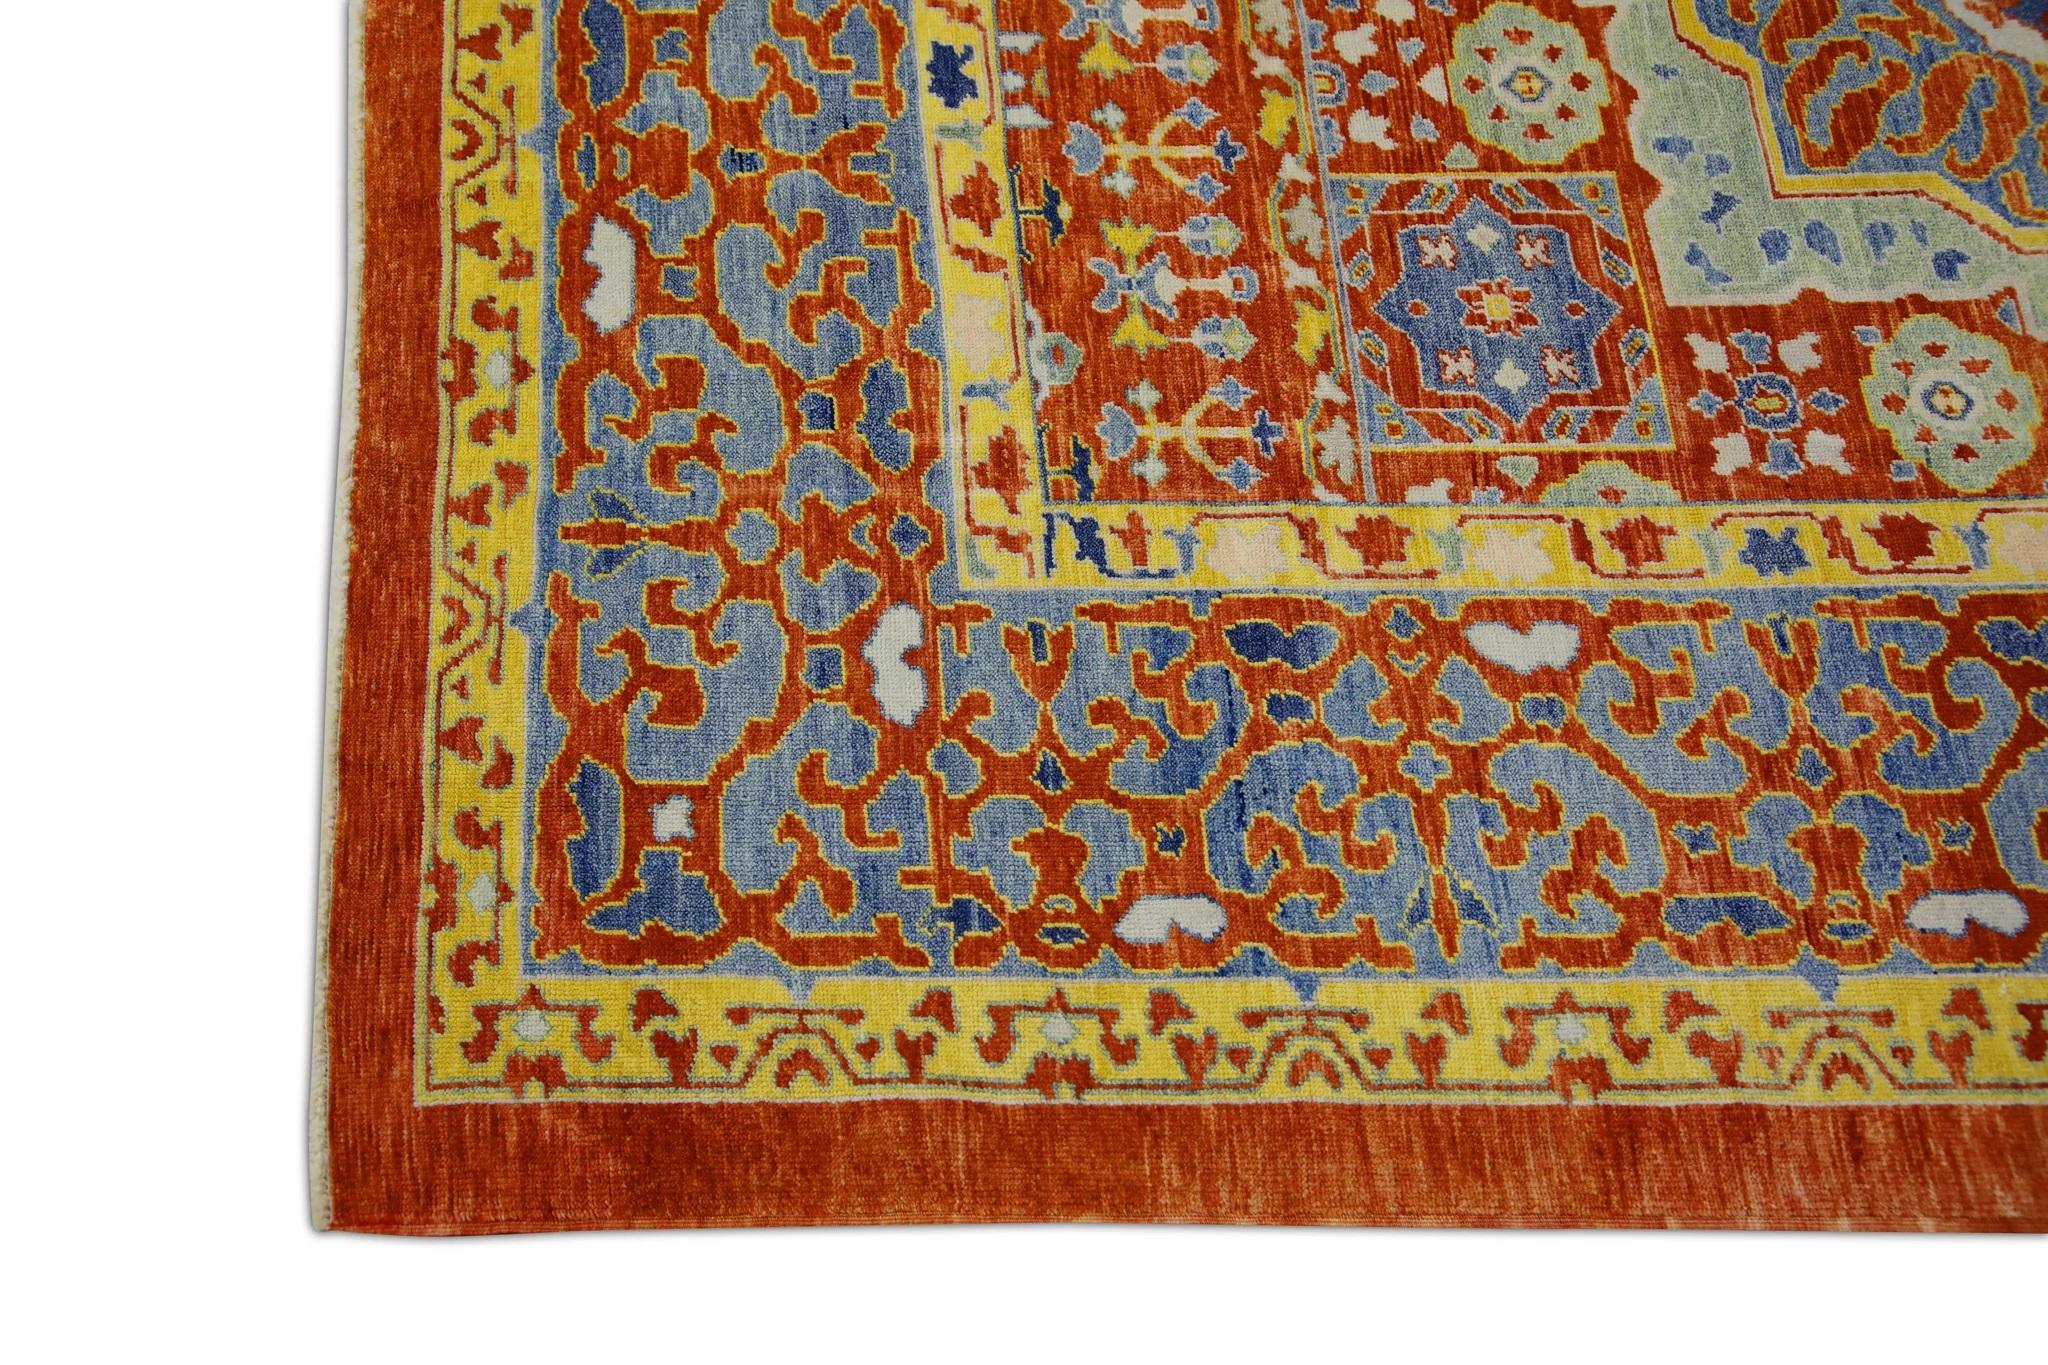 Vegetable Dyed Floral Turkish Finewoven Wool Oushak Rug in Red, Blue, and Yellow 8'3